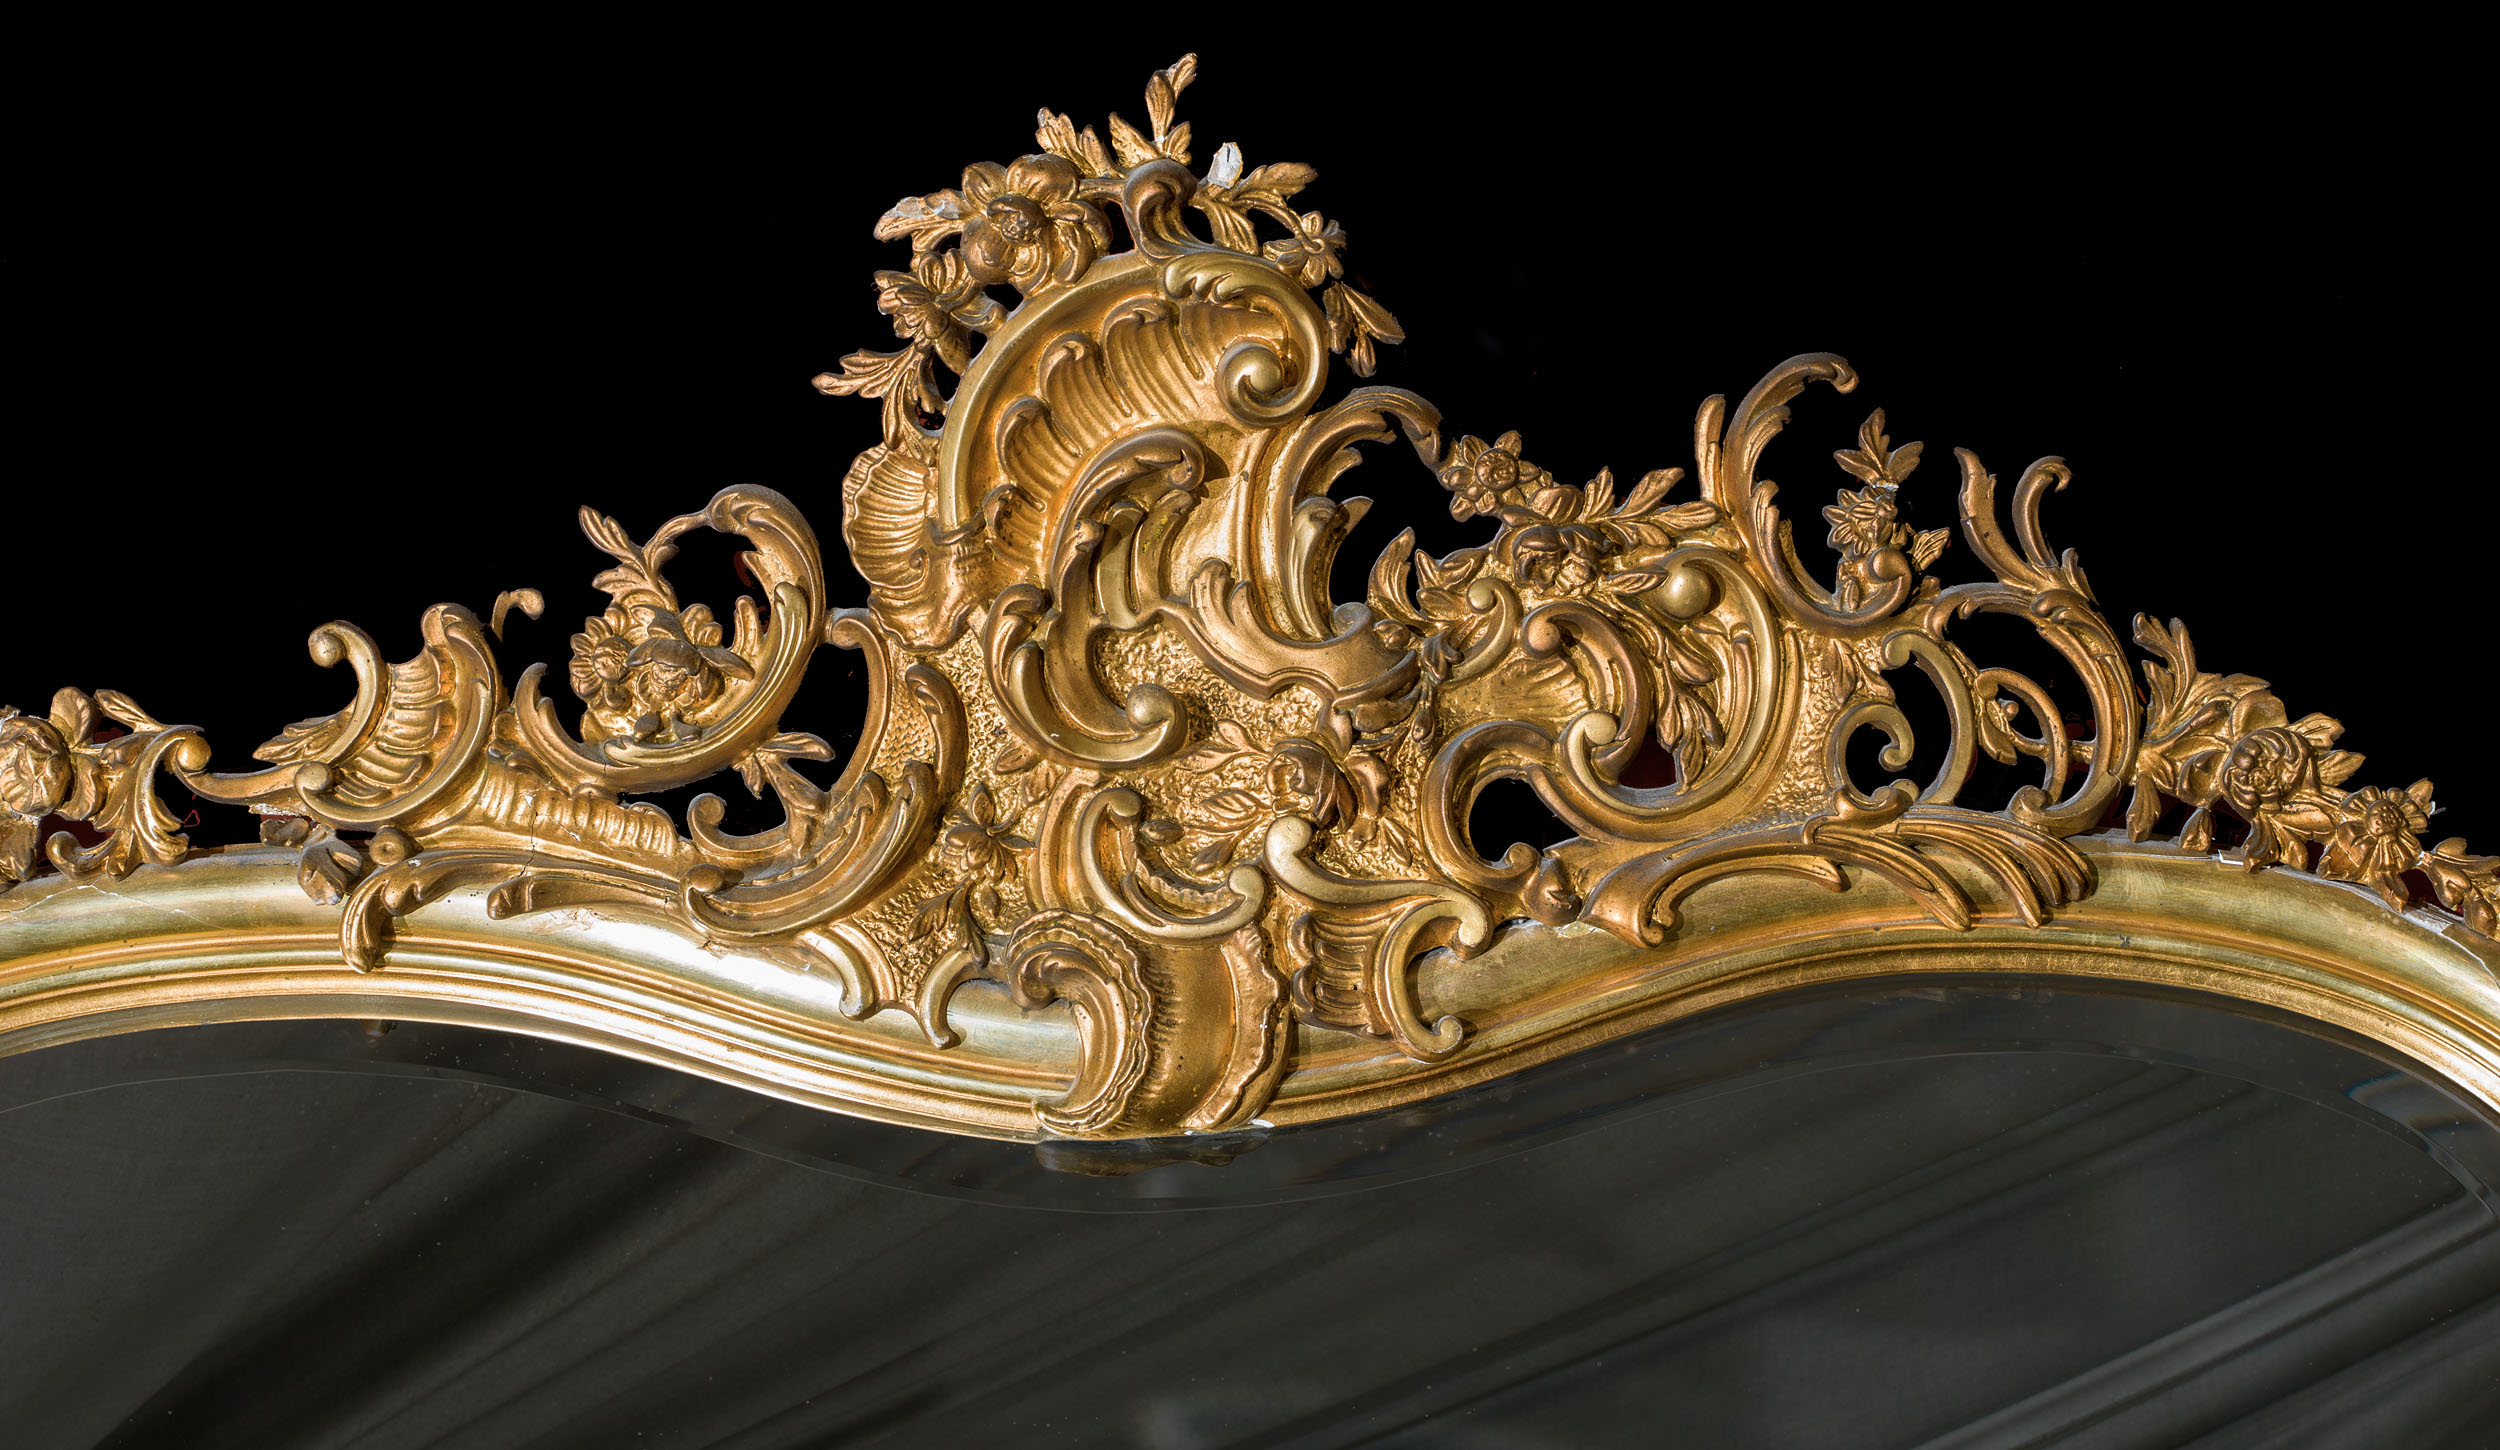 A Rococo Style Giltwood Overmantel Mirror